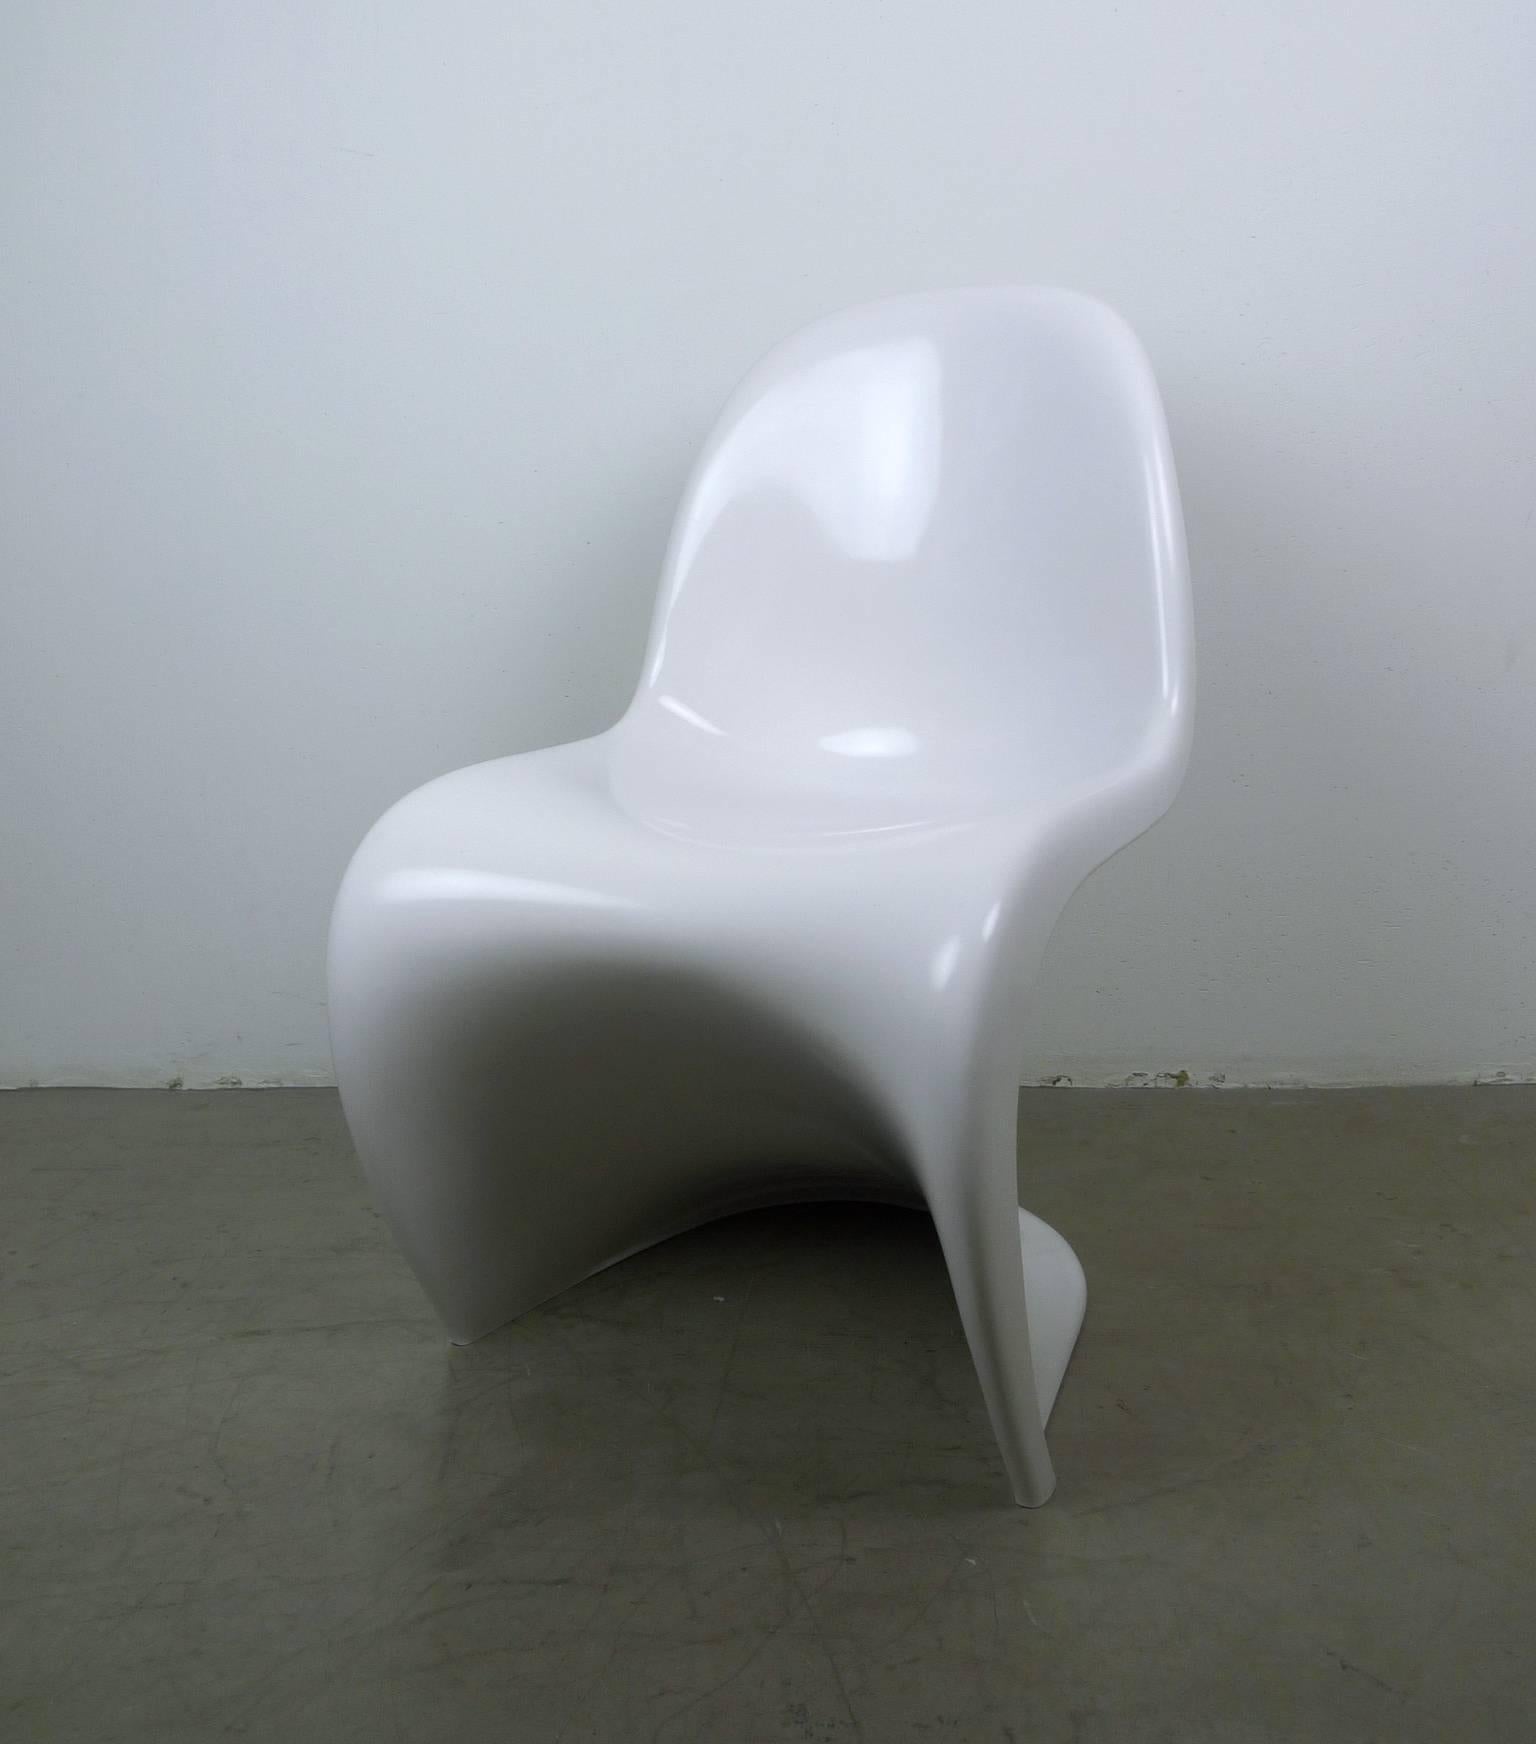 Pair of White Panton Chairs by Verner Panton for Fehlbau from 1971 and 1972 In Good Condition For Sale In Berlin, DE